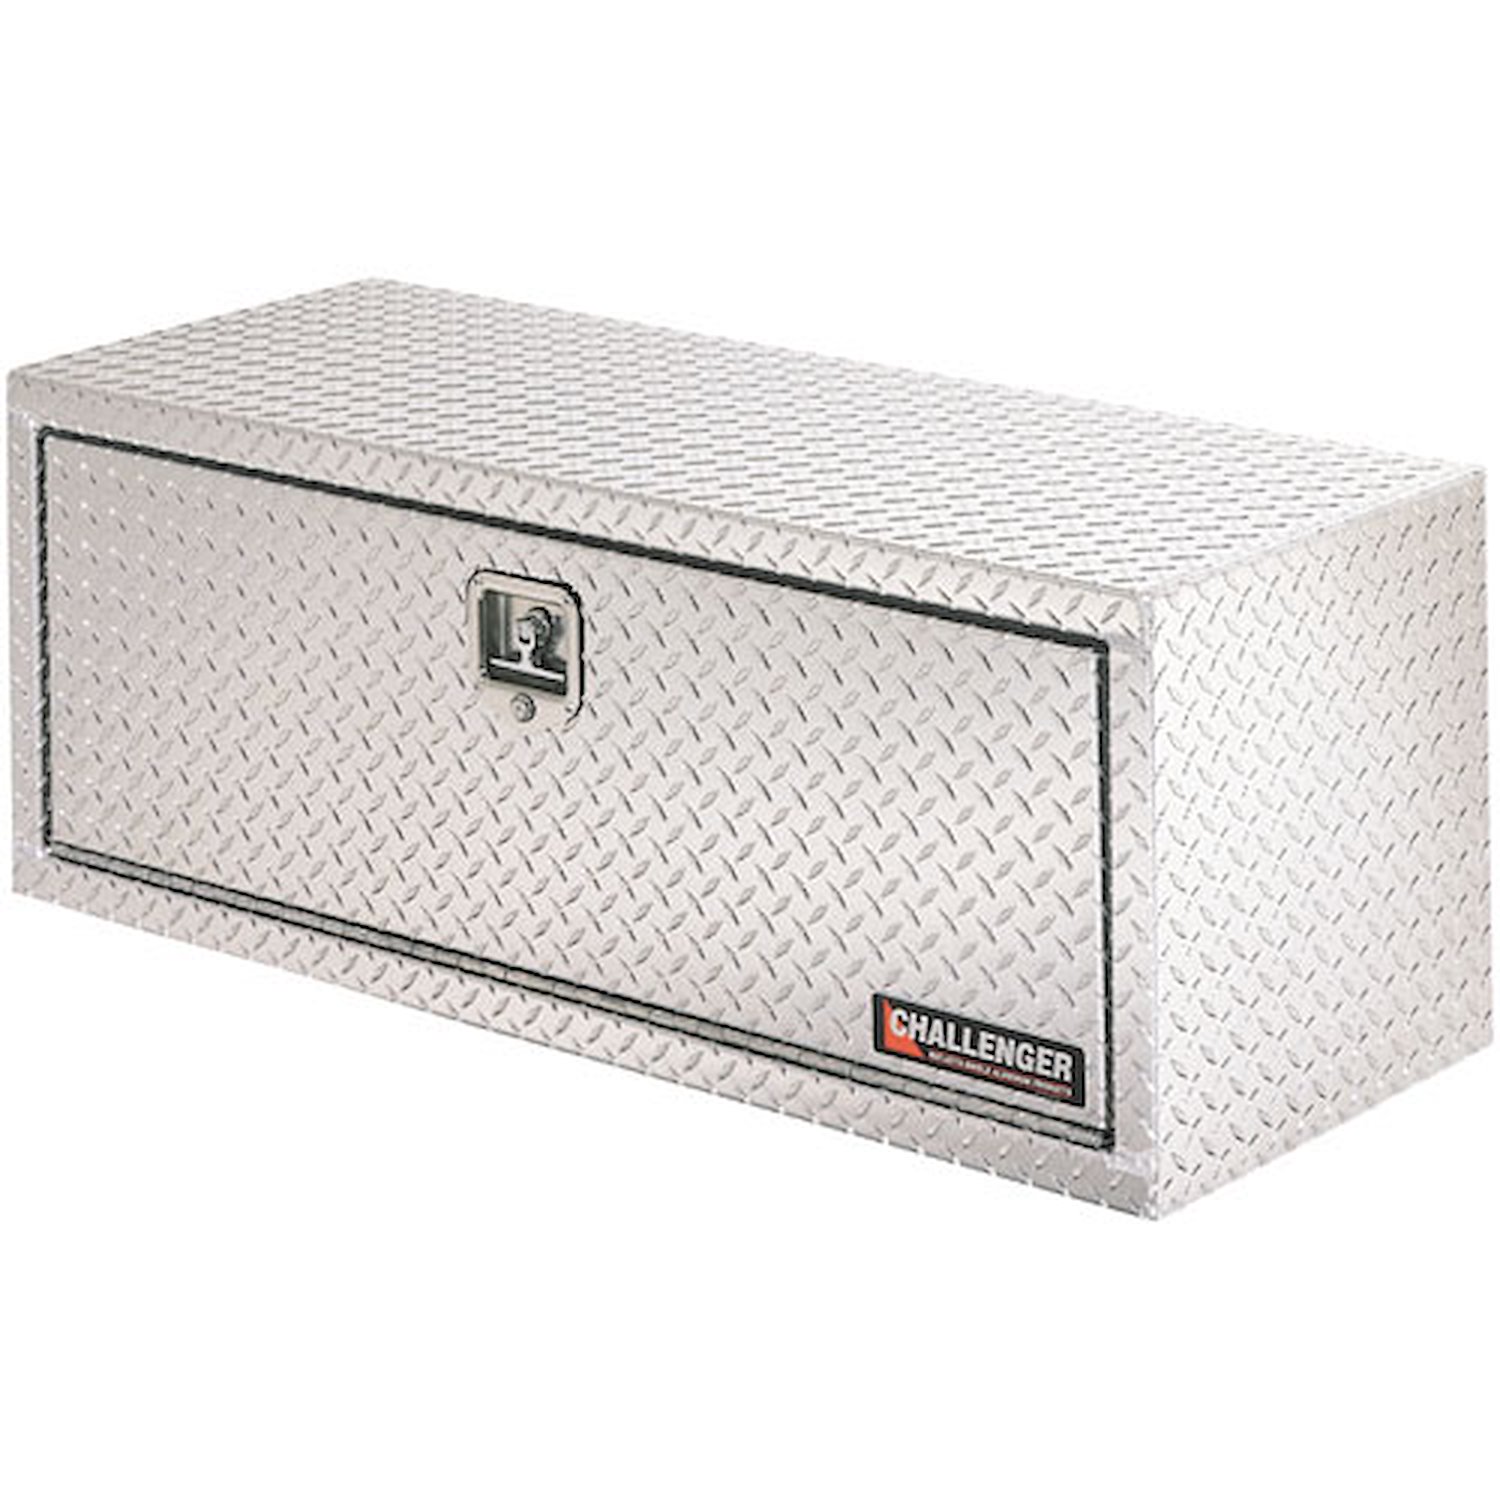 UnderBed Challenger Tool Box Length: 36"